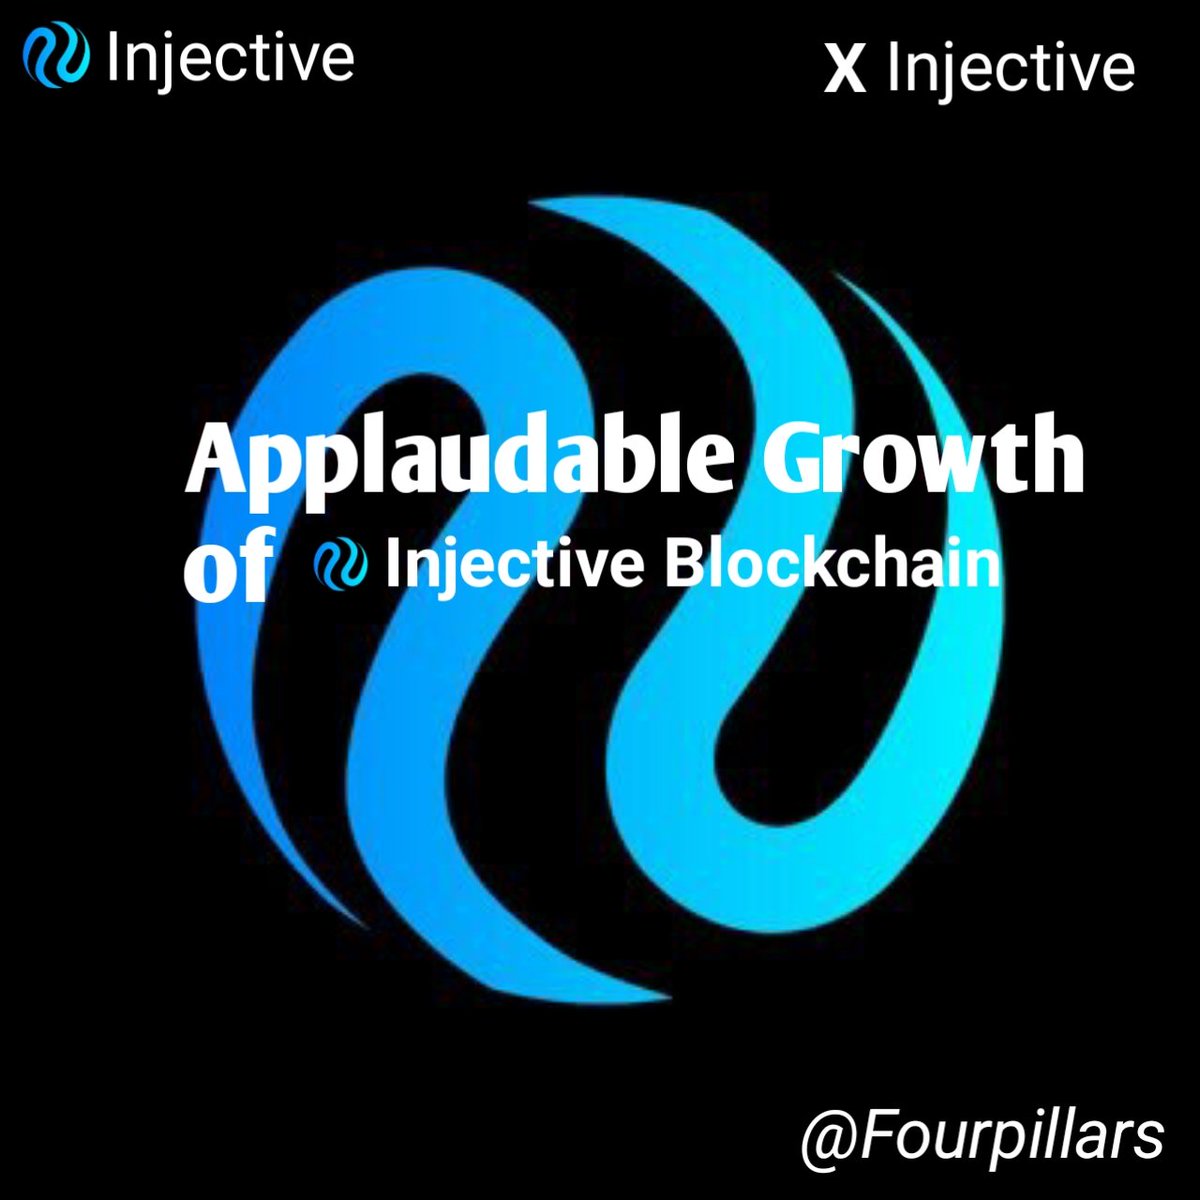 #Helpinjectivethrive🚀
This is a great piece that has recognized an applaudable Growth of Injective Blockchain. The power of its consistency and sustainability which birthed the milestone we celebrate today.

Full article 👇
4pillars.io/en/articles/In…